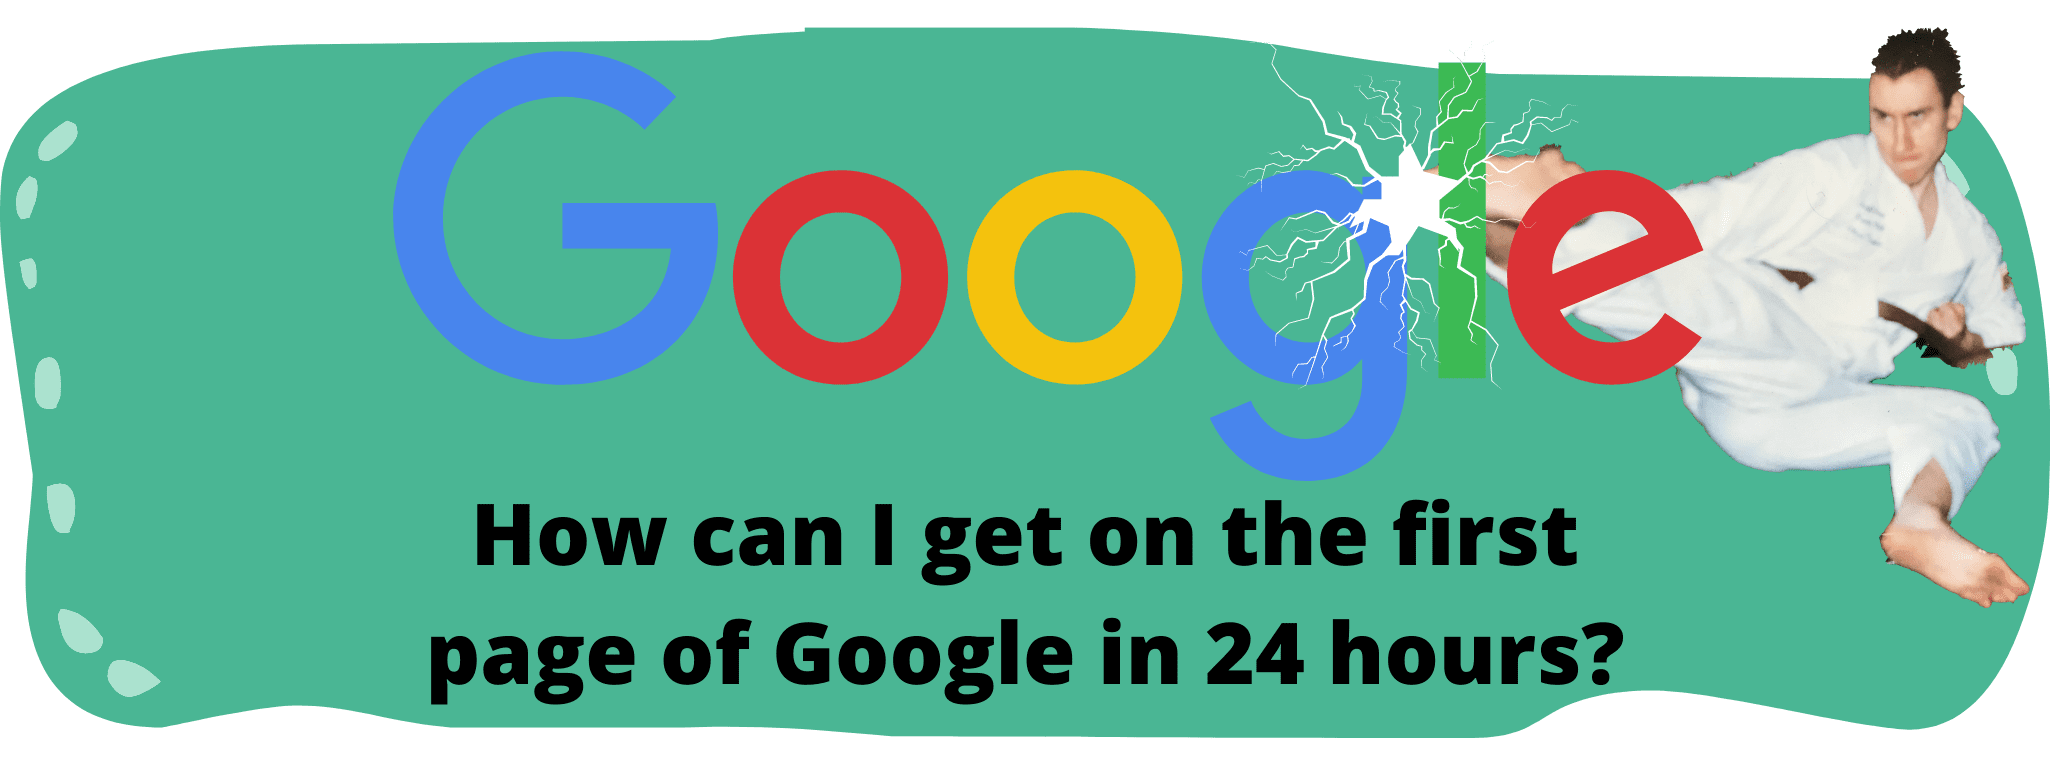 picture of How can I get on the first page of Google in 24 hours?